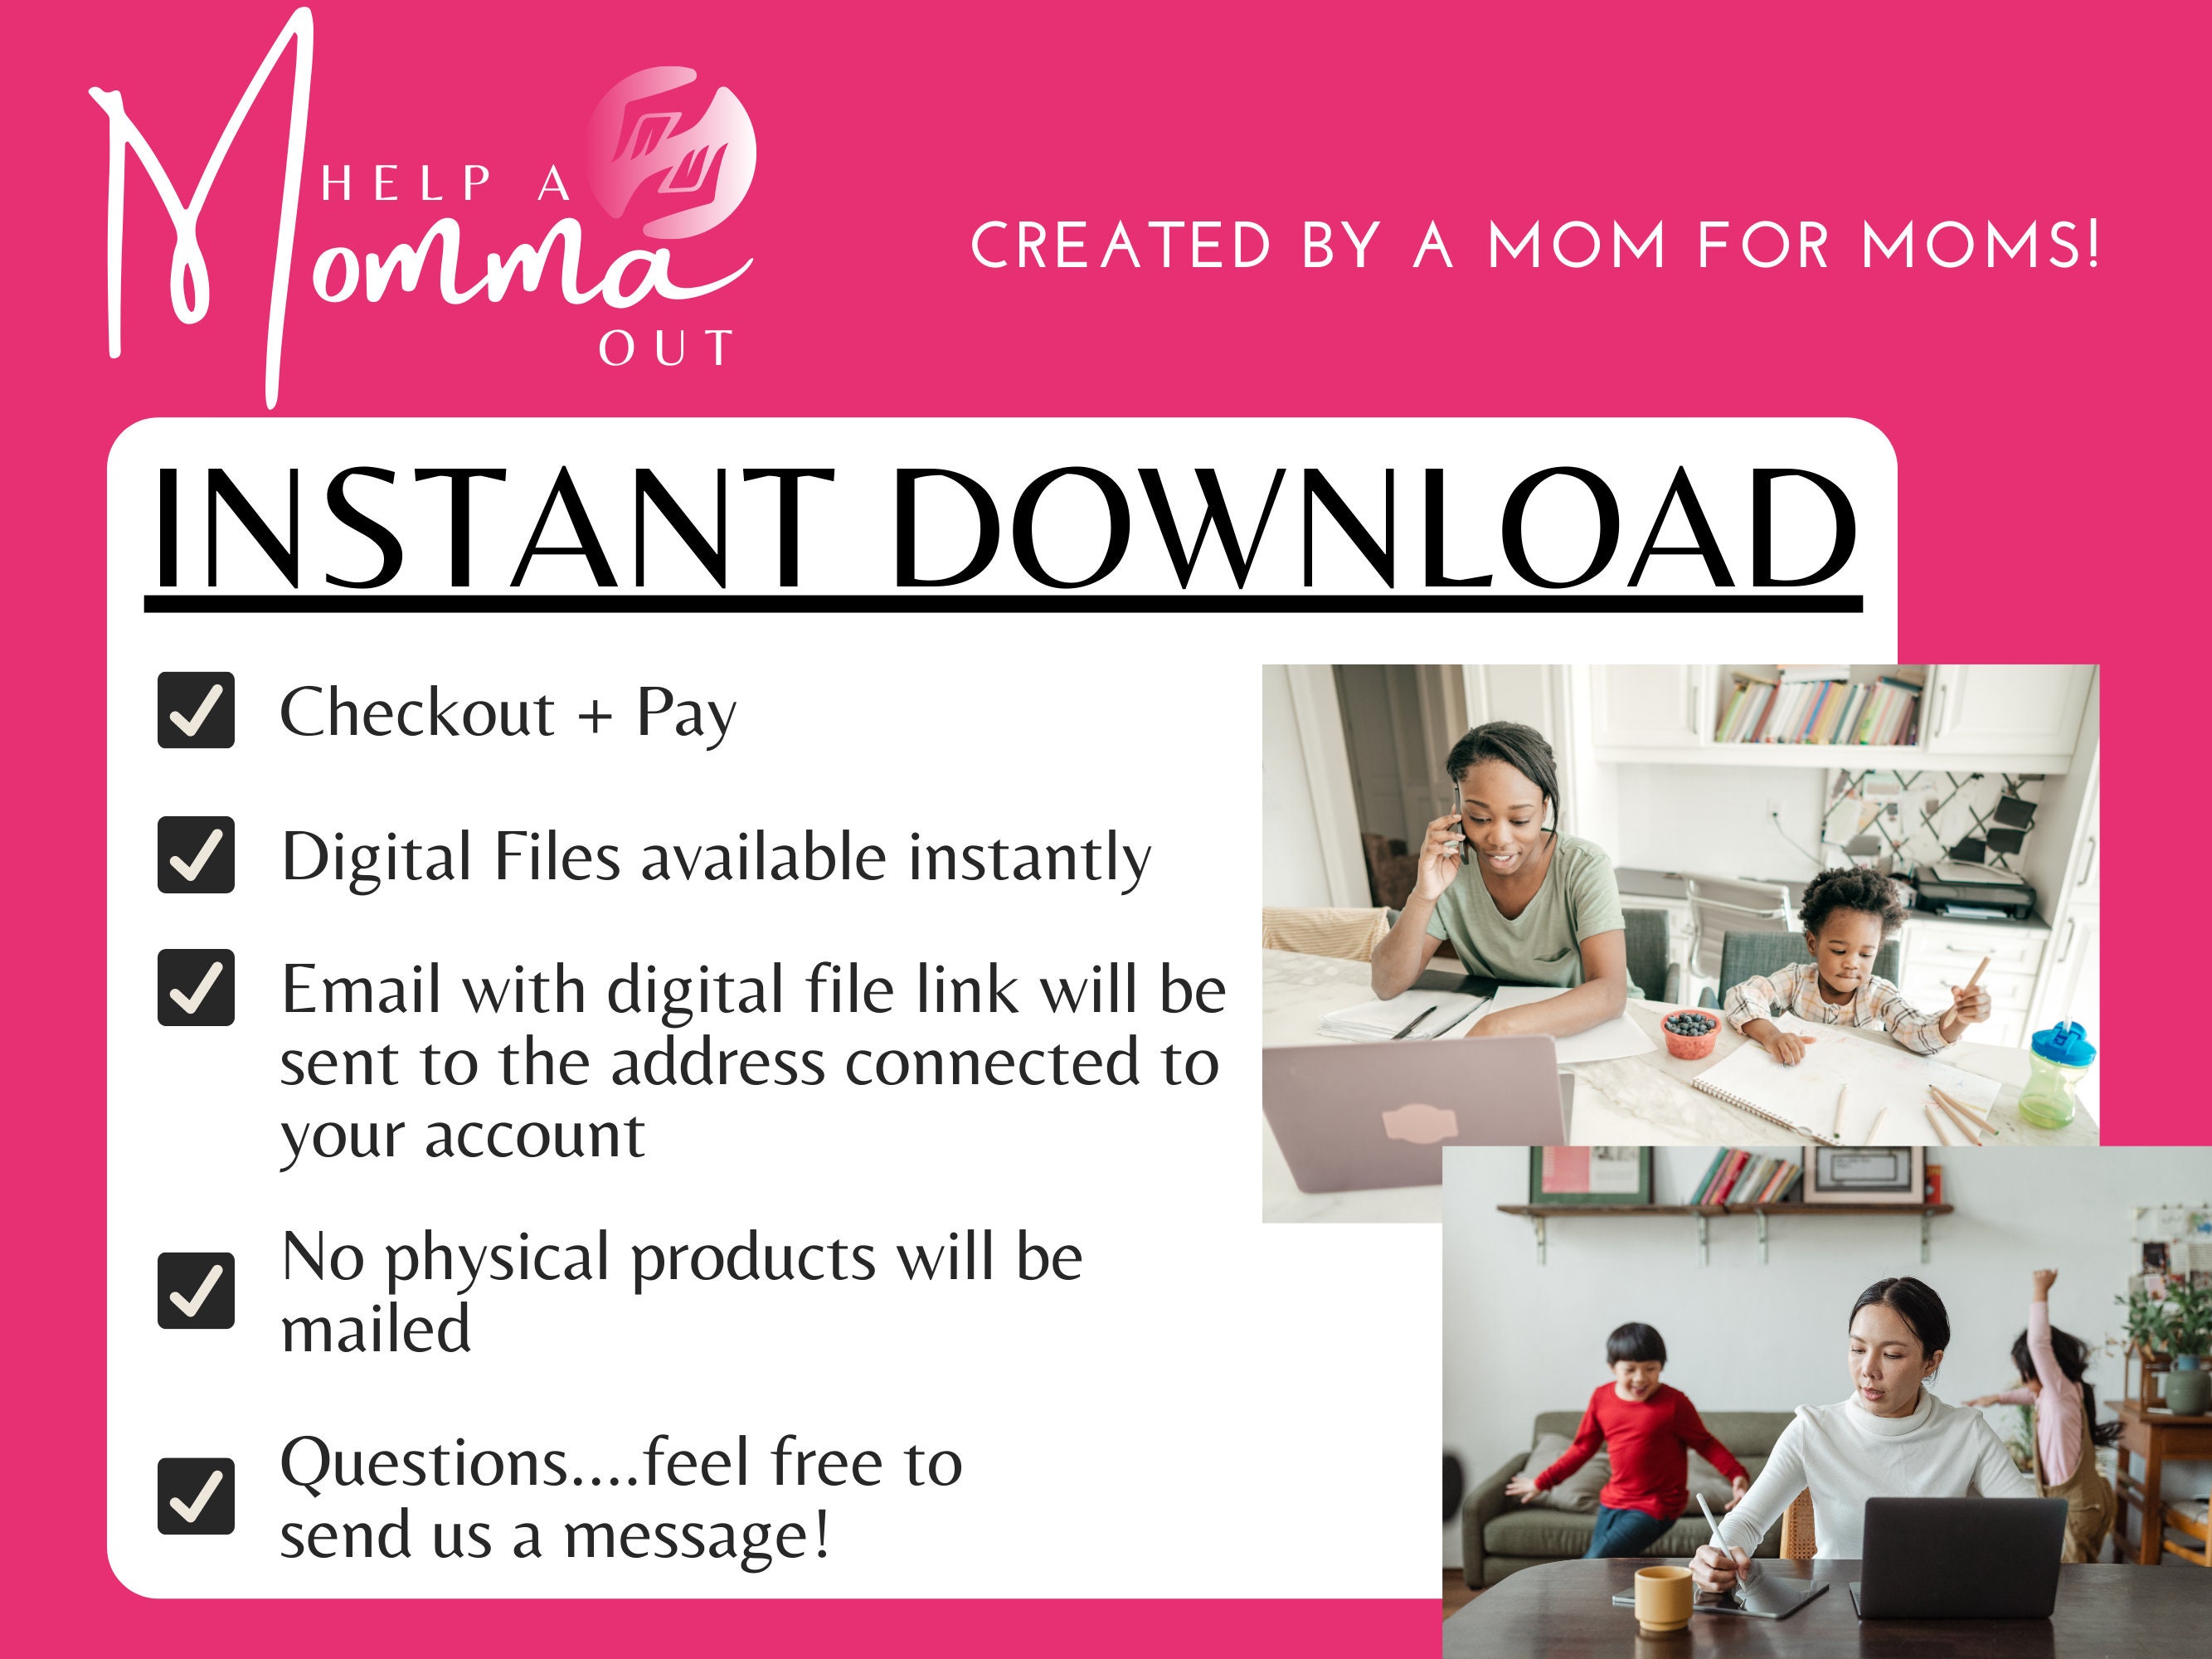 How to Become a Mompreneur in 4 Weeks Ebook / Work From Home / 